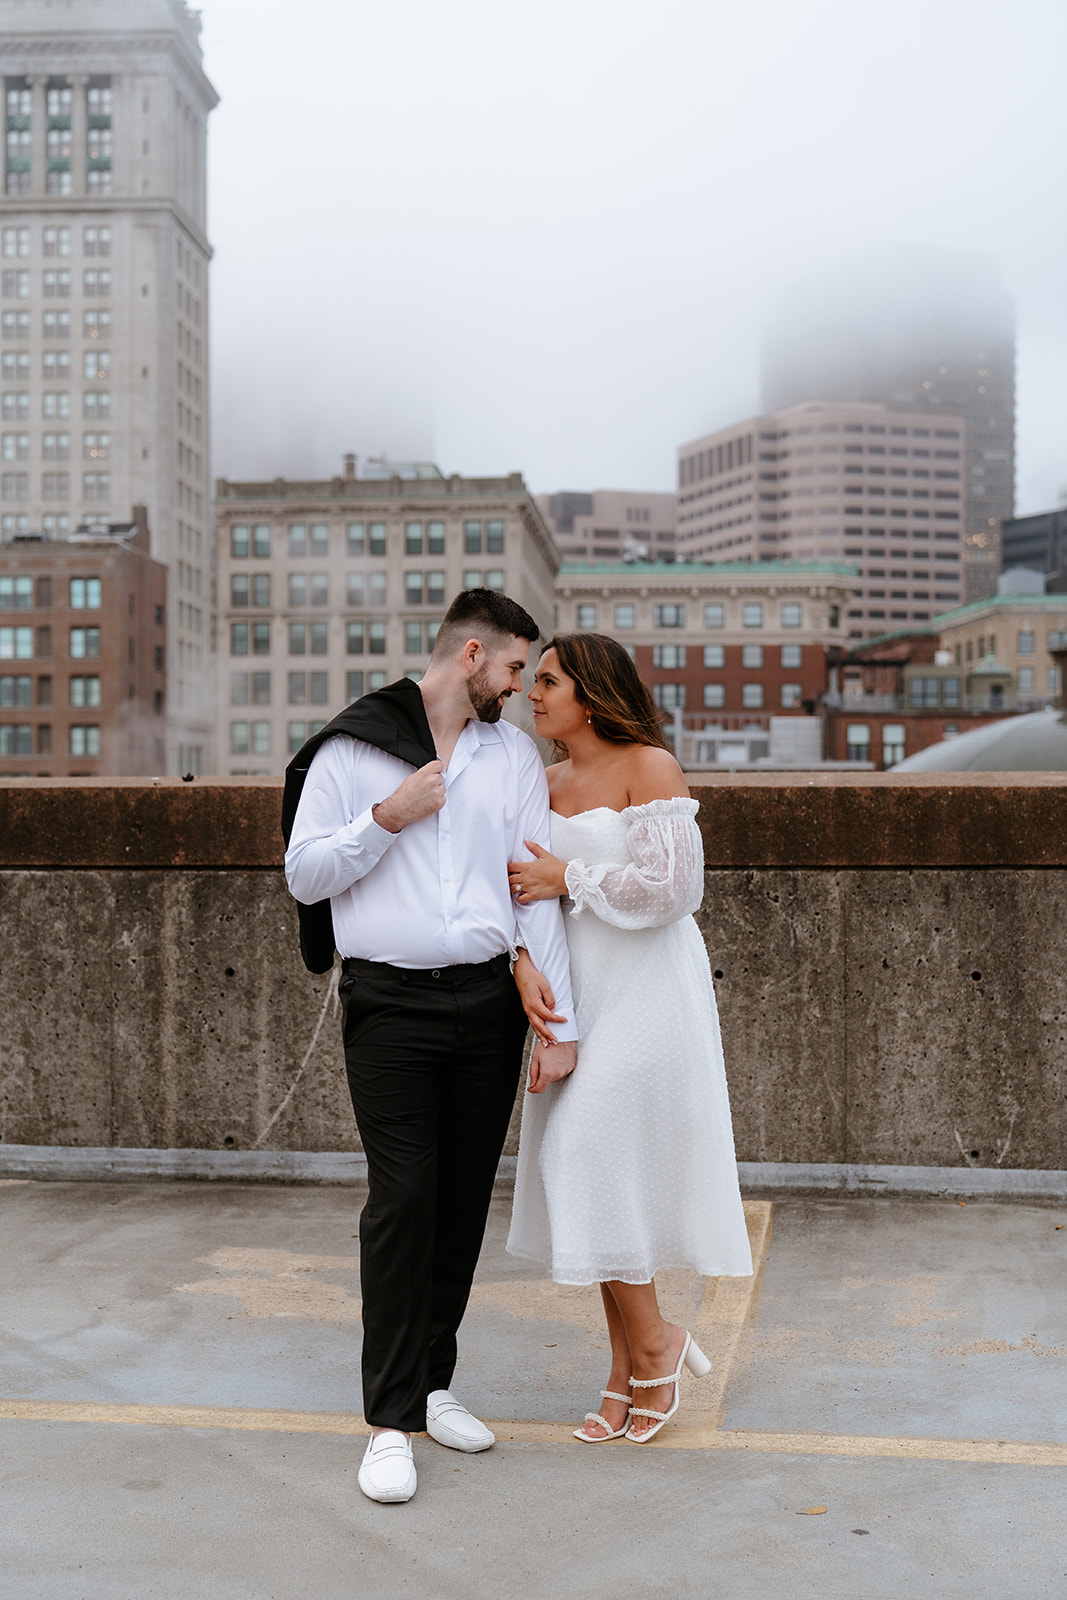 A couple stands on a rooftop parking garage in formal attire;Buildings and a foggy sky are visible in the background for their engagement photos